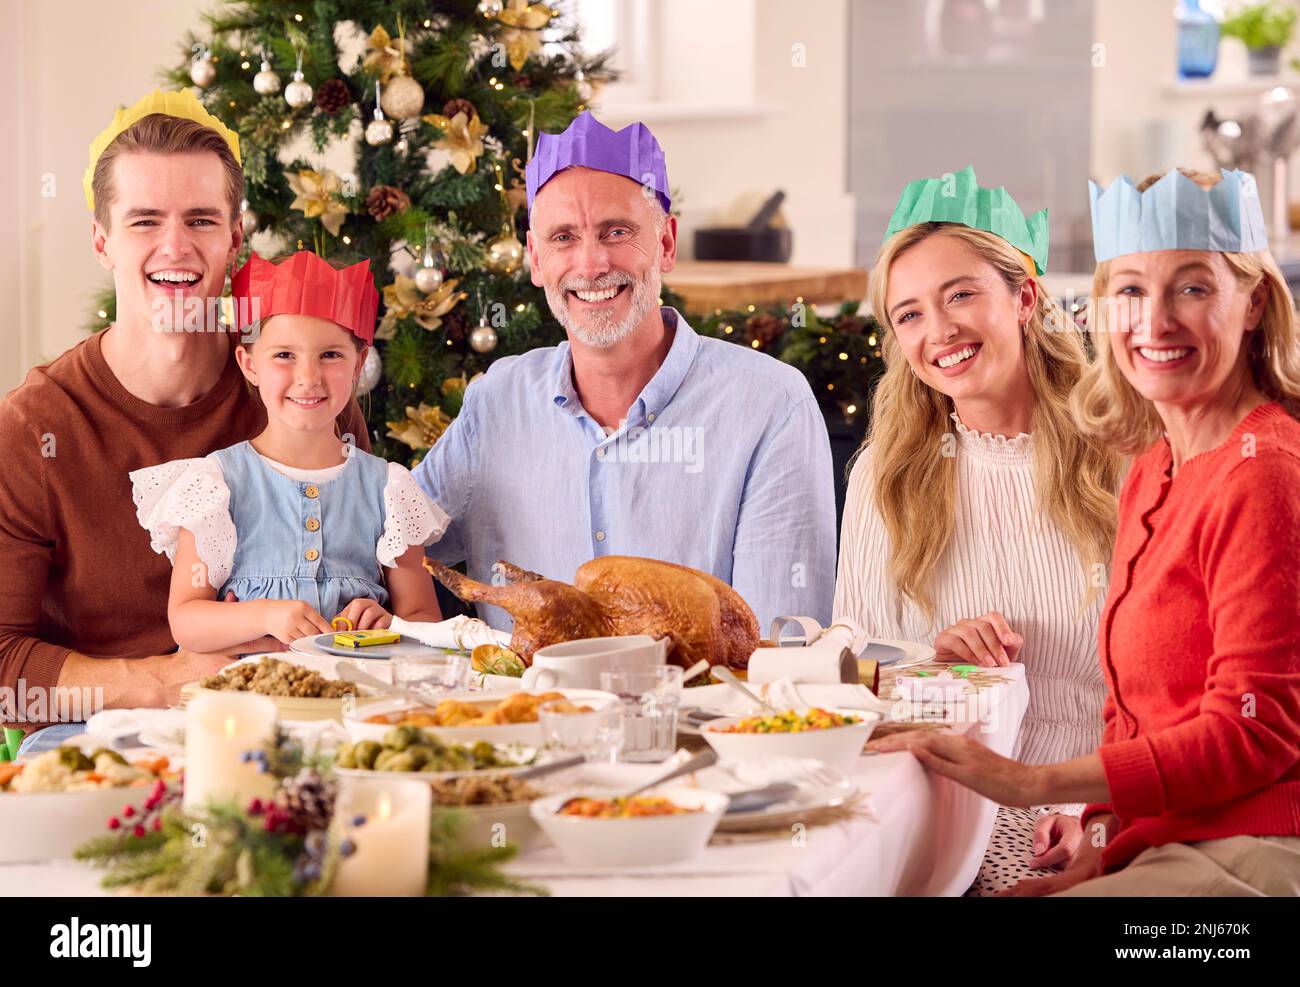 Portrait Of Multi-Generation Family Celebrating Christmas At Home Wearing Paper Hats Before Meal Stock Photo